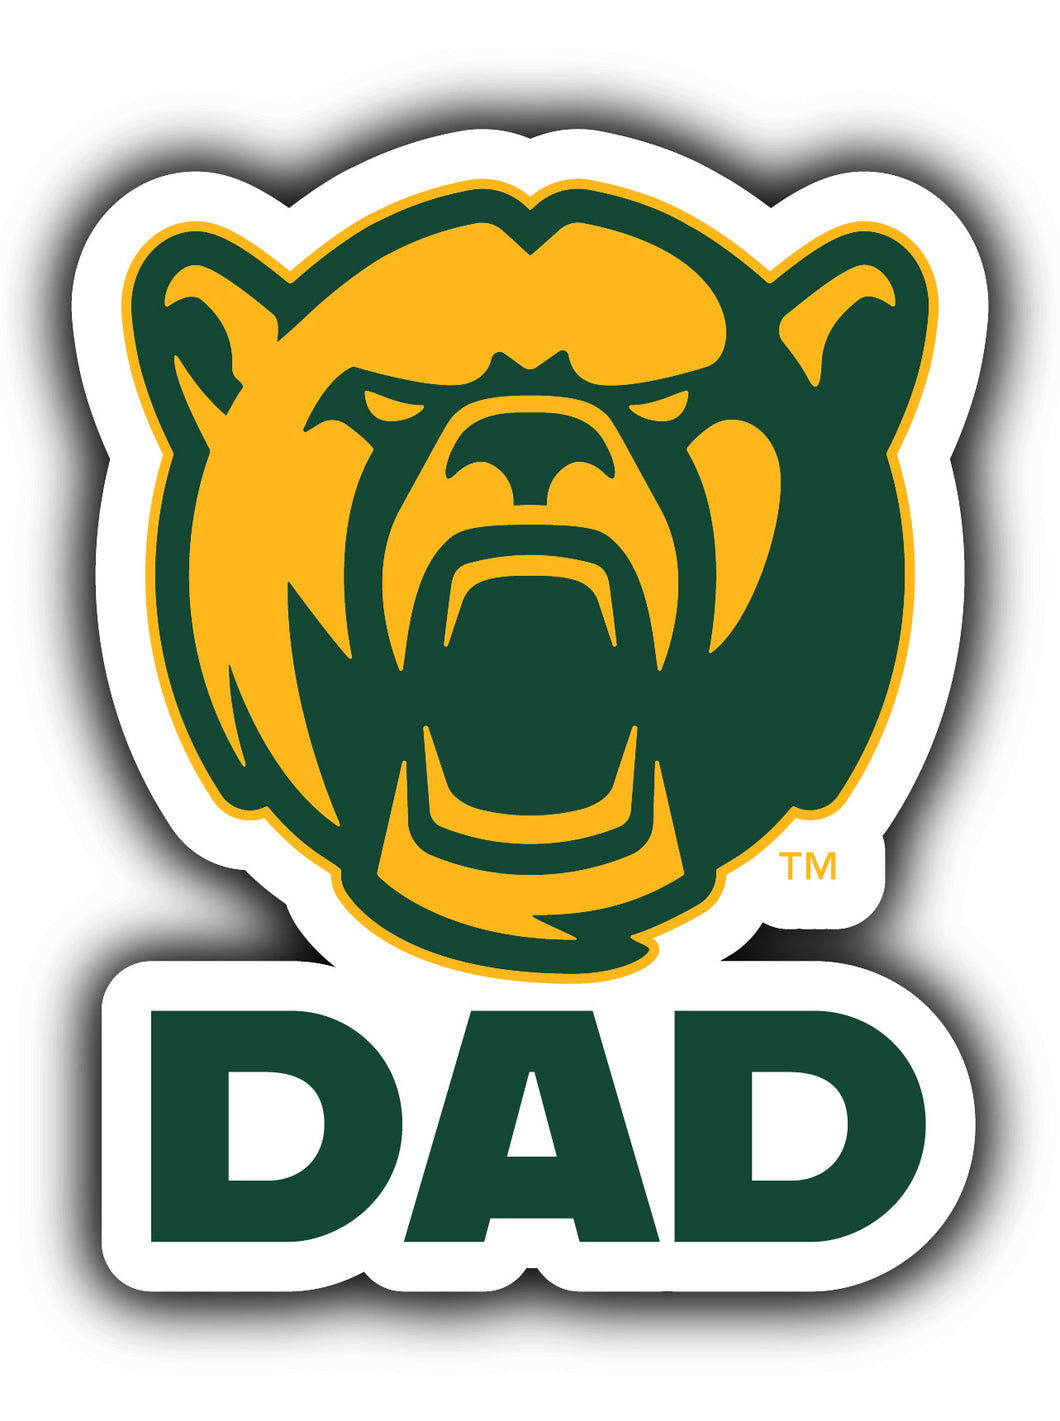 Baylor Bears 4-Inch Proud Dad NCAA - Durable School Spirit Vinyl Decal Perfect Gift for Dad